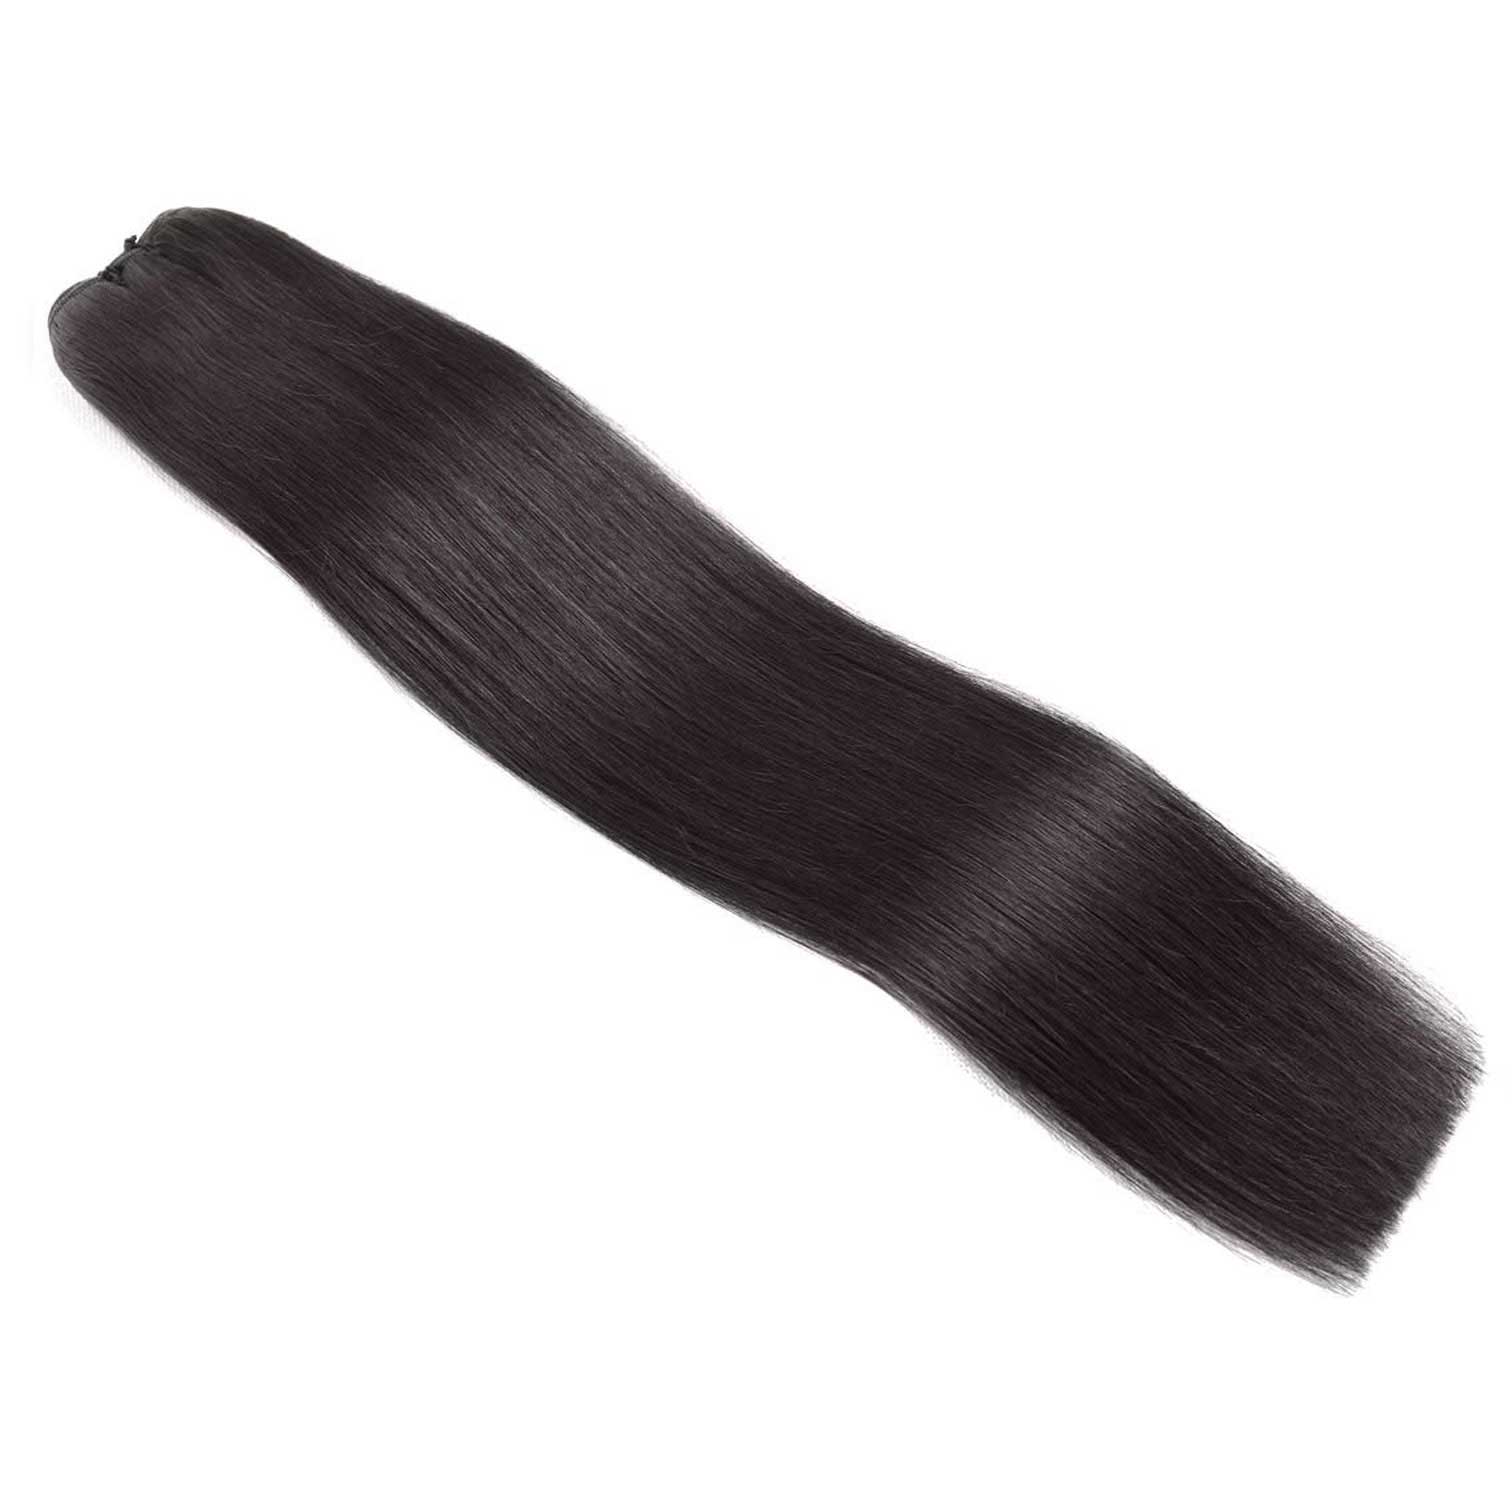 Weft Hair Extensions #1c Midnight Brown 17” 60 Grams